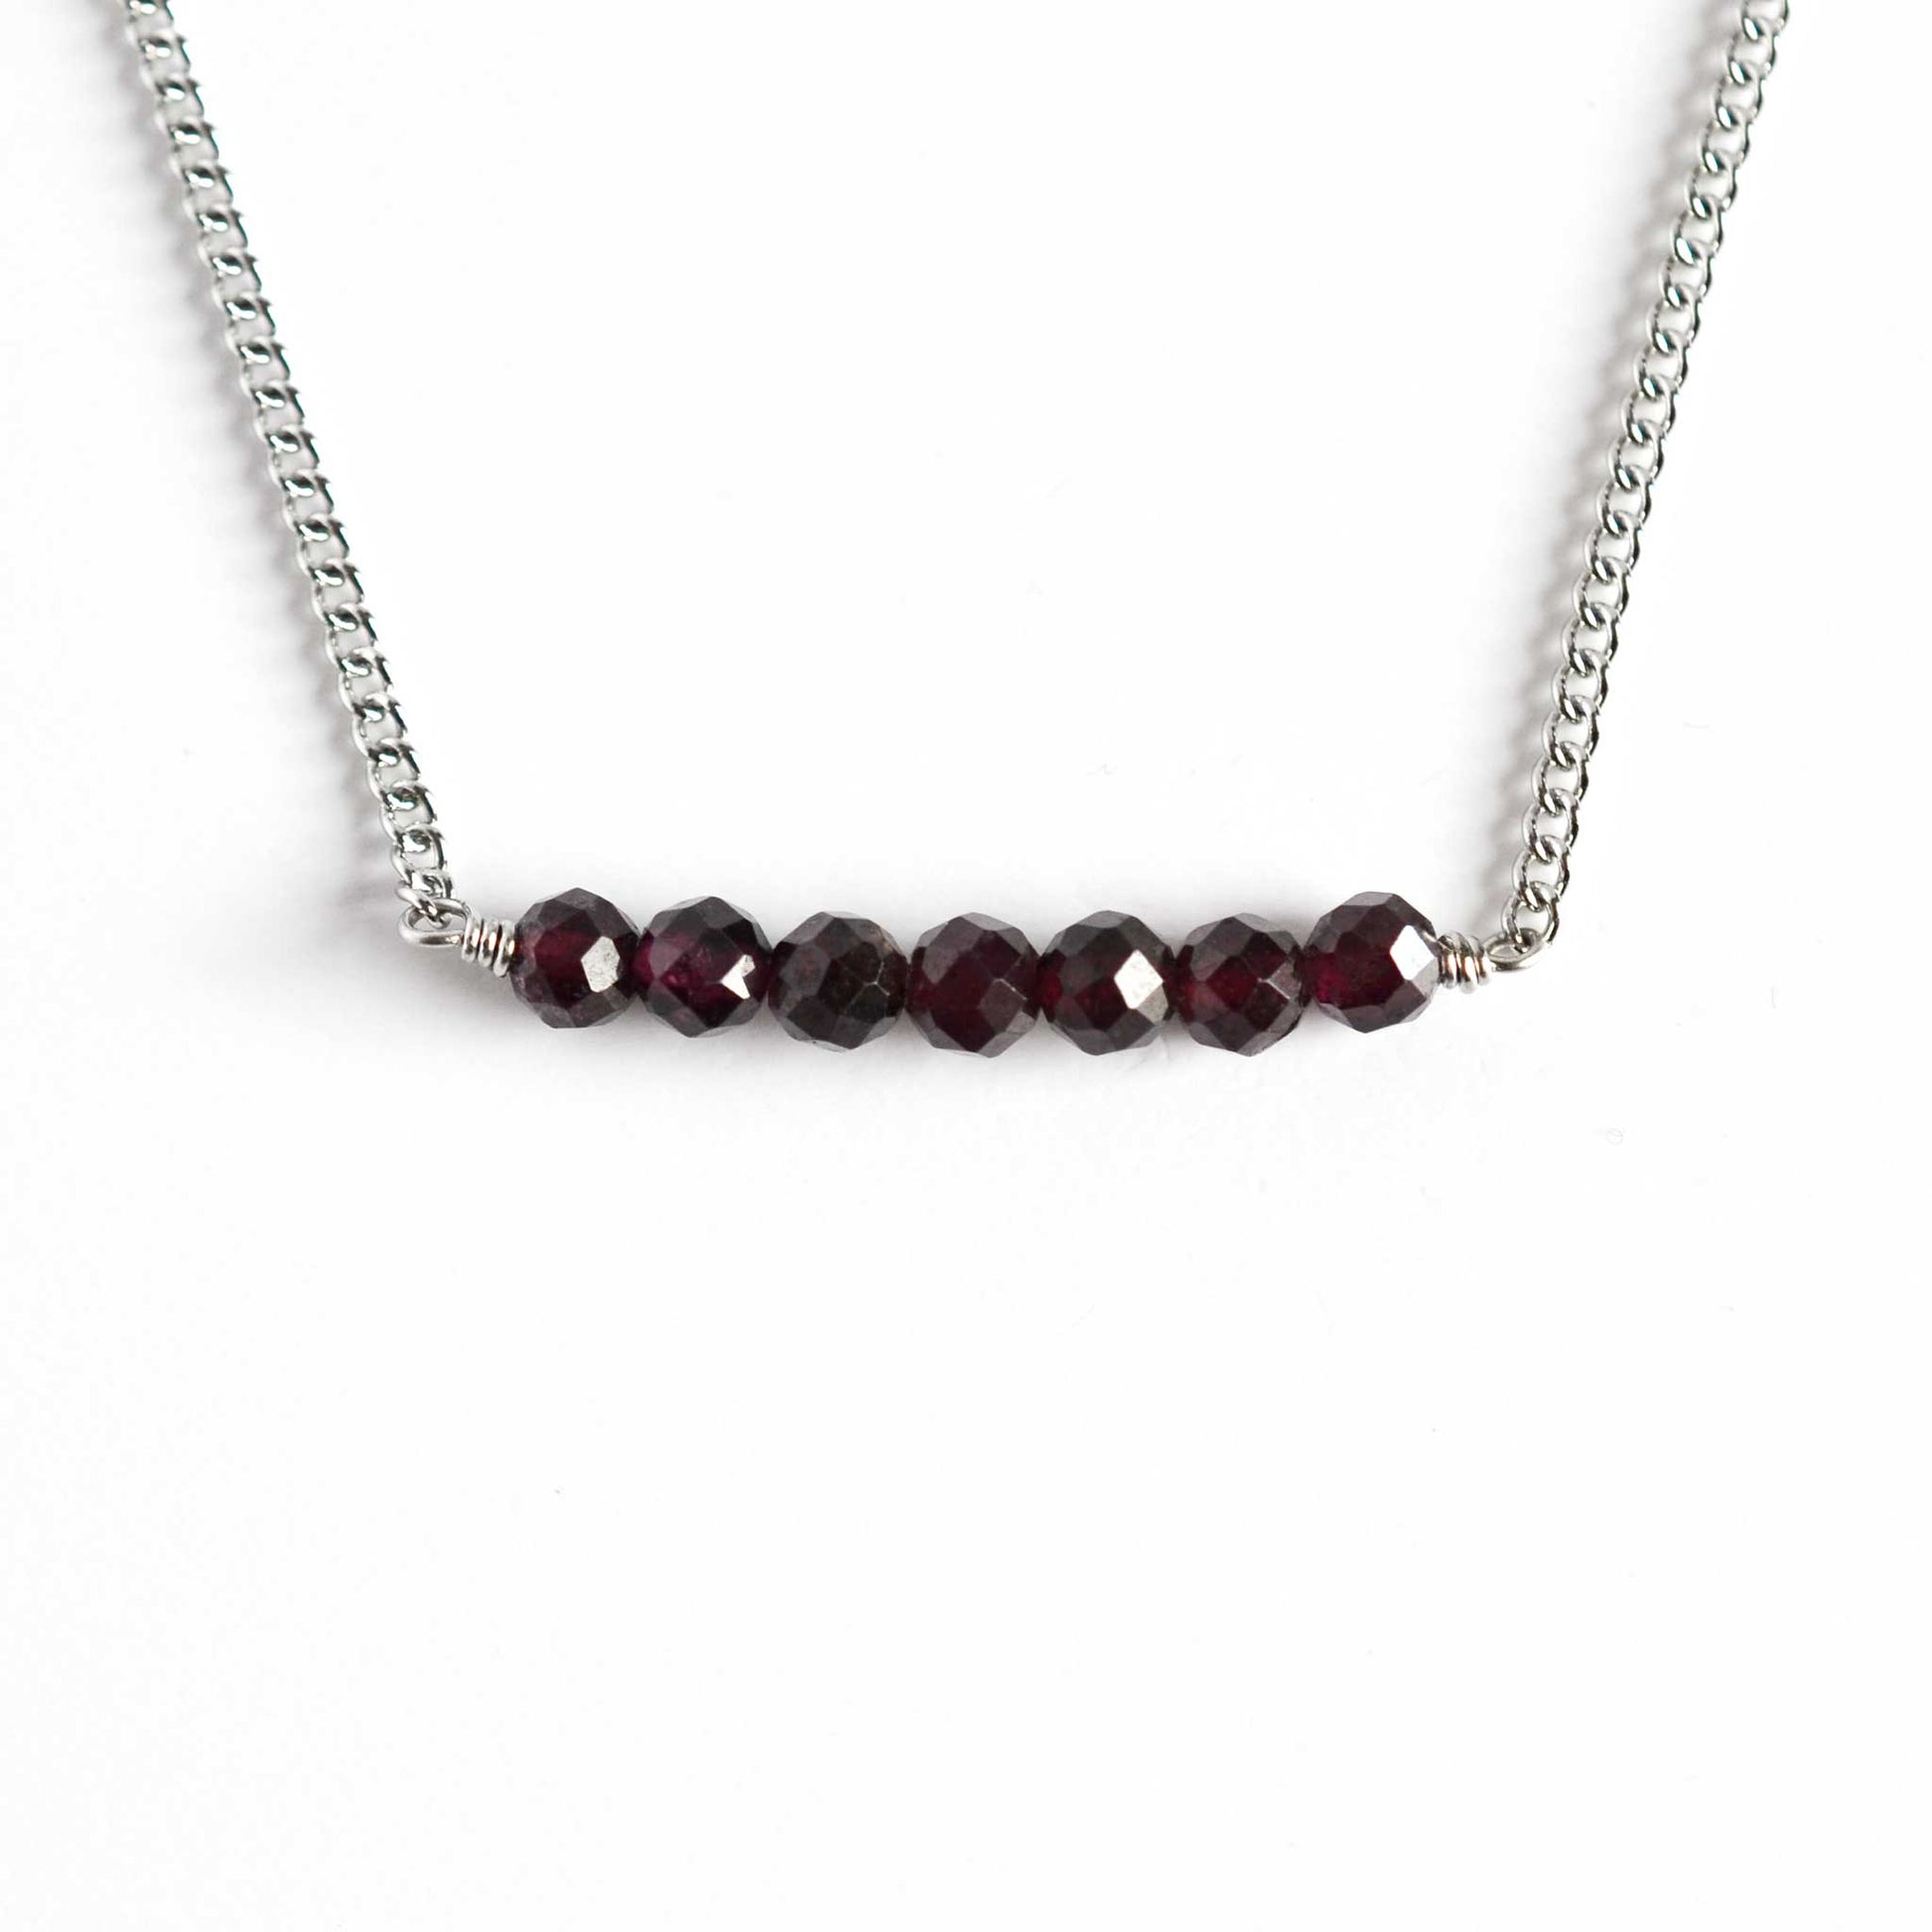 Garnet gemstones wire wrapped to stainless steel necklace chain